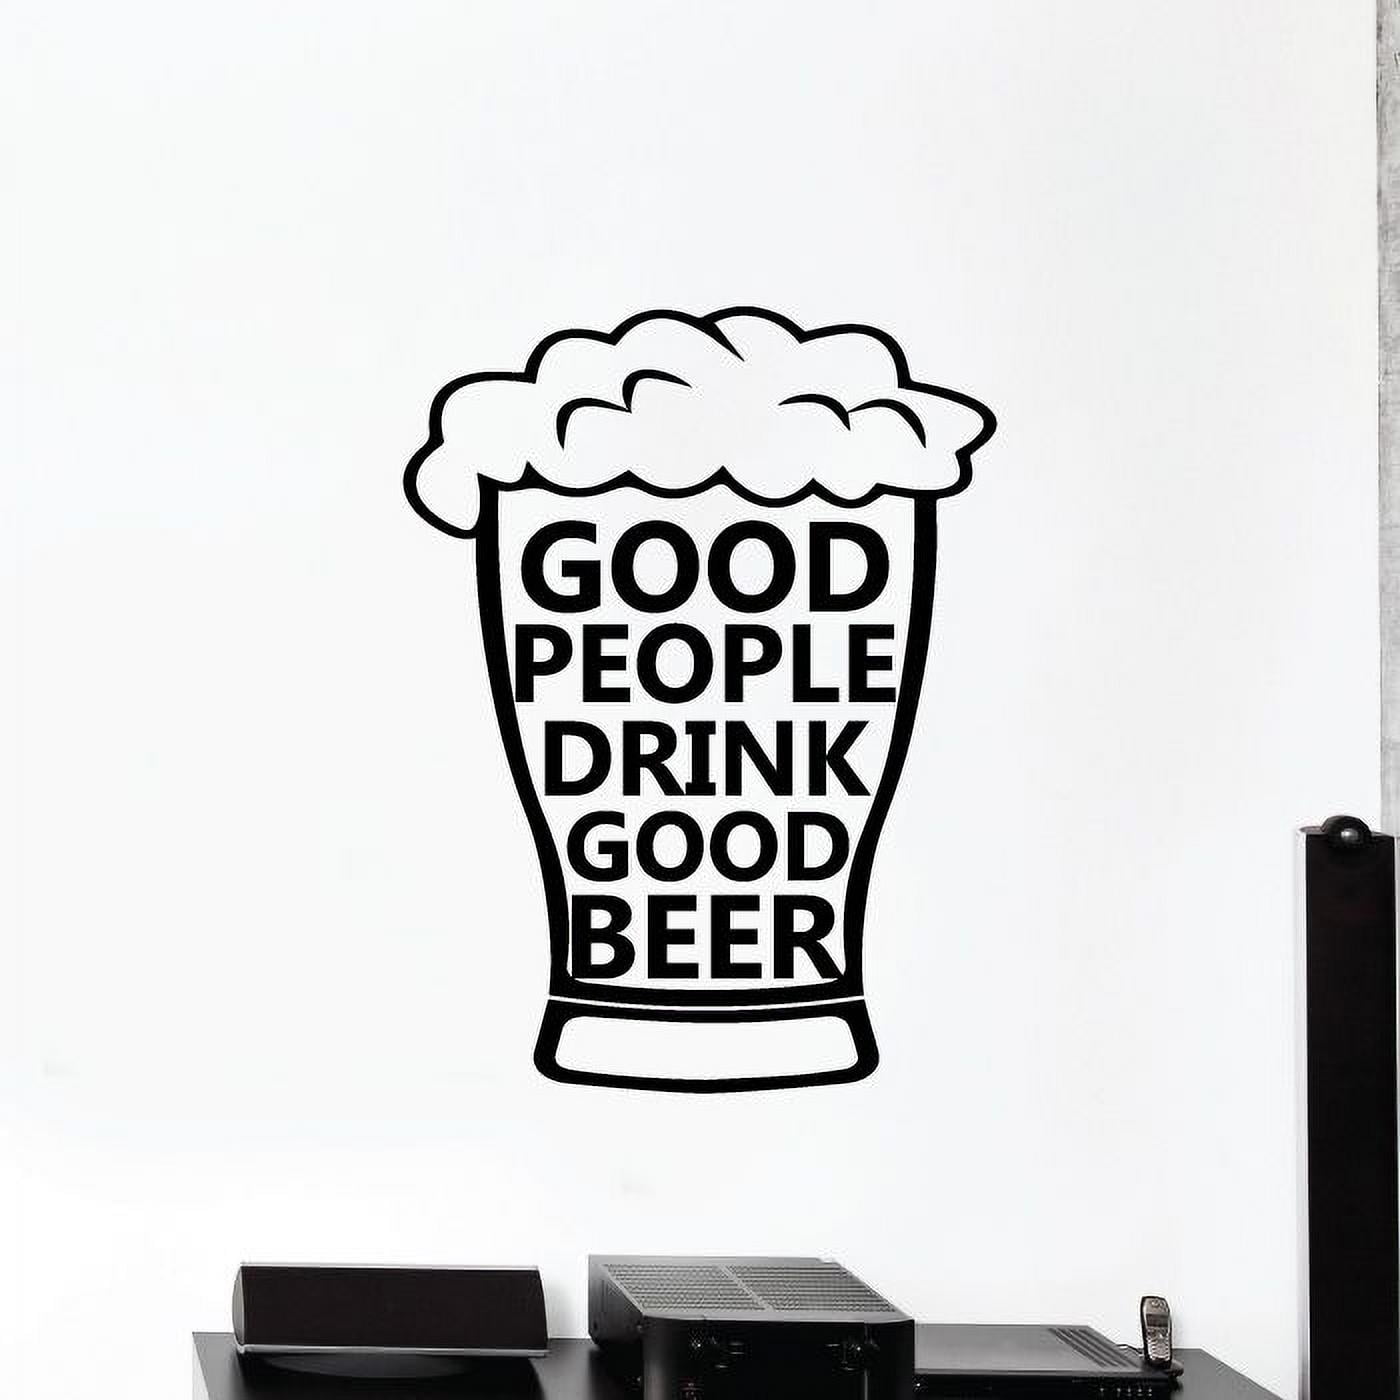 Good People for Good Beer